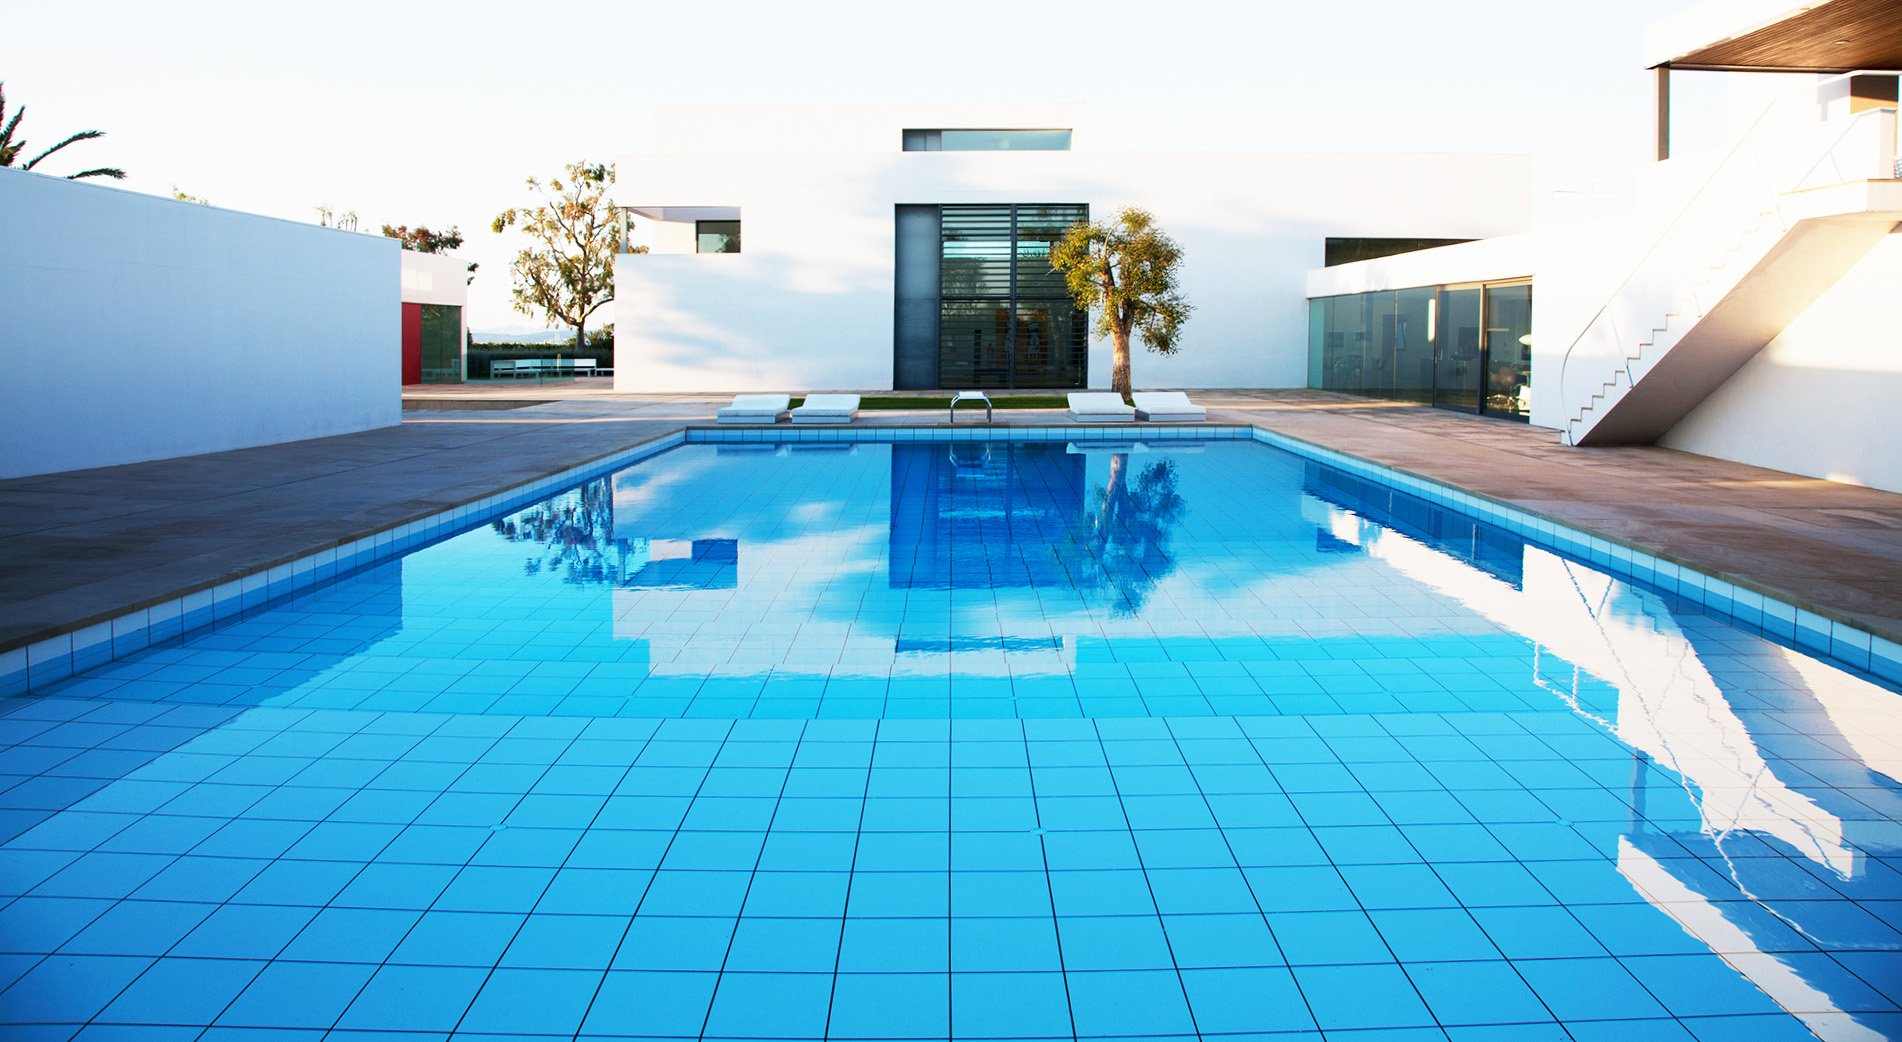 Reseda Pool Cleaning Company: How to Find the Best One?